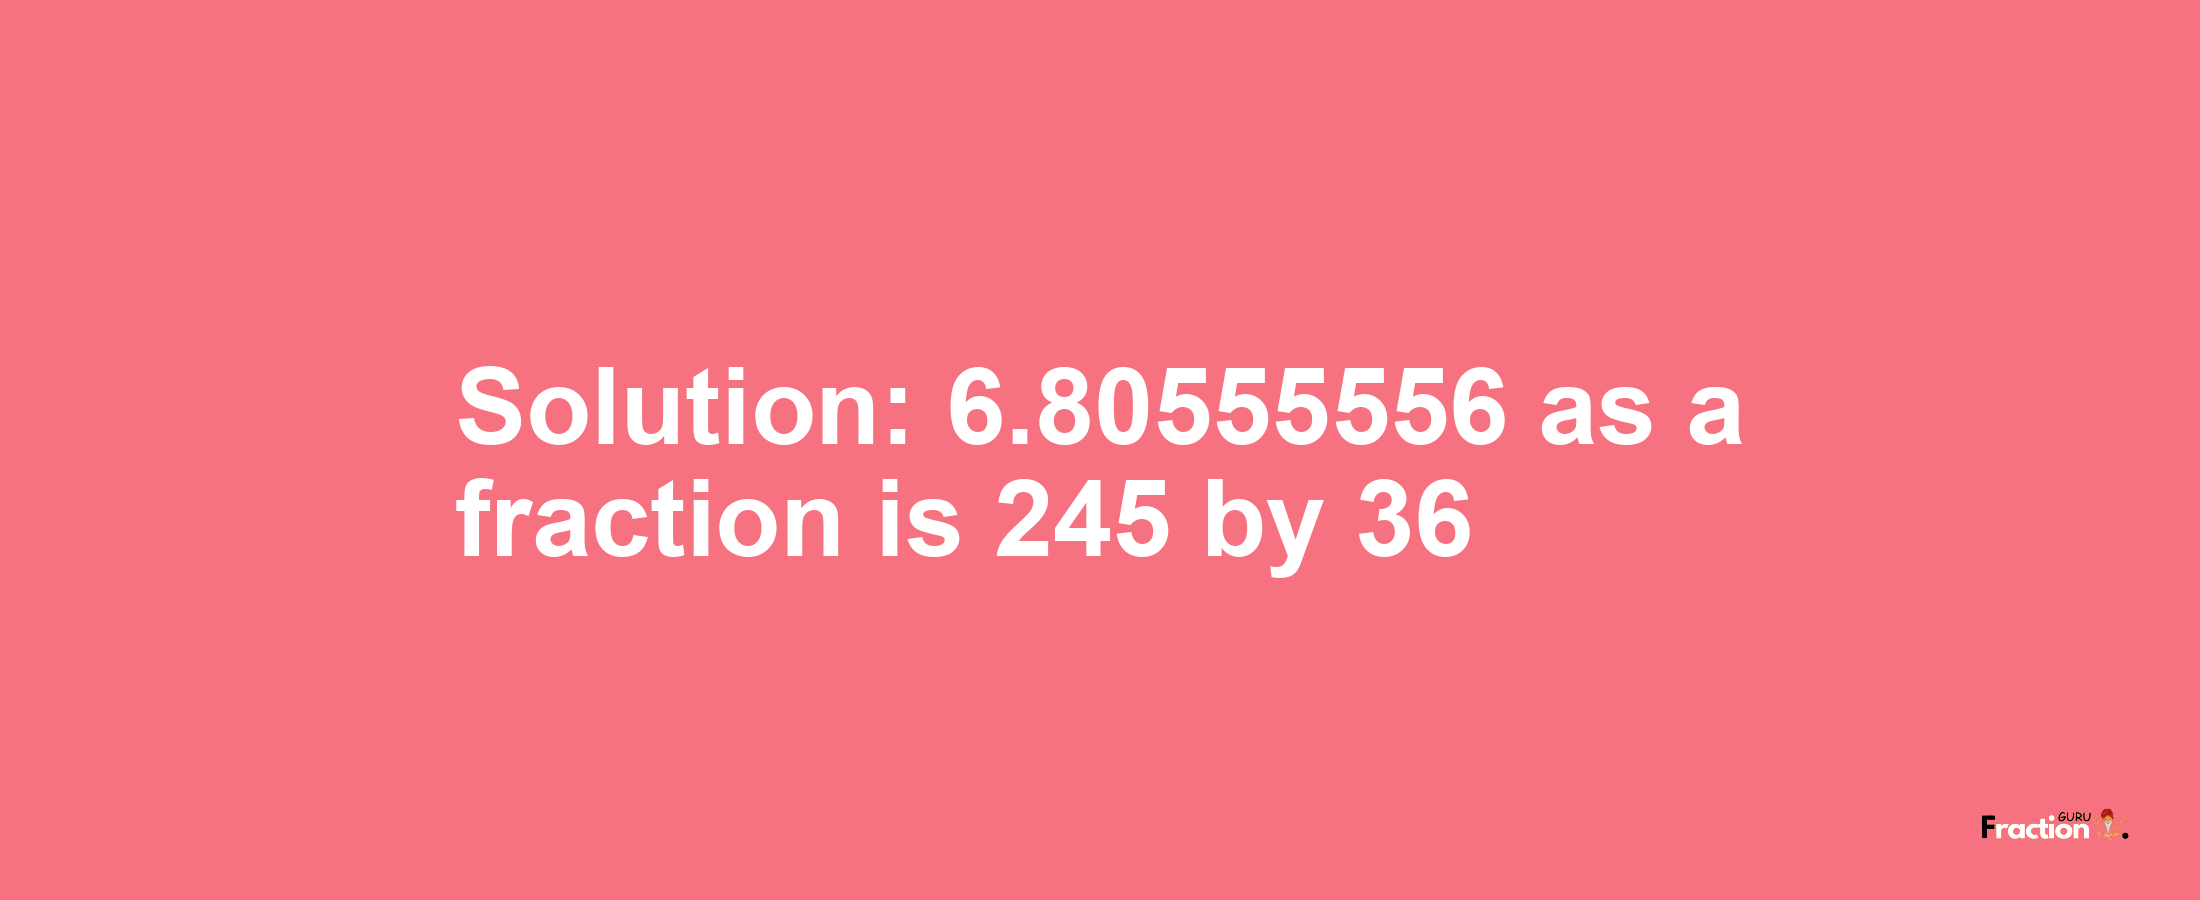 Solution:6.80555556 as a fraction is 245/36